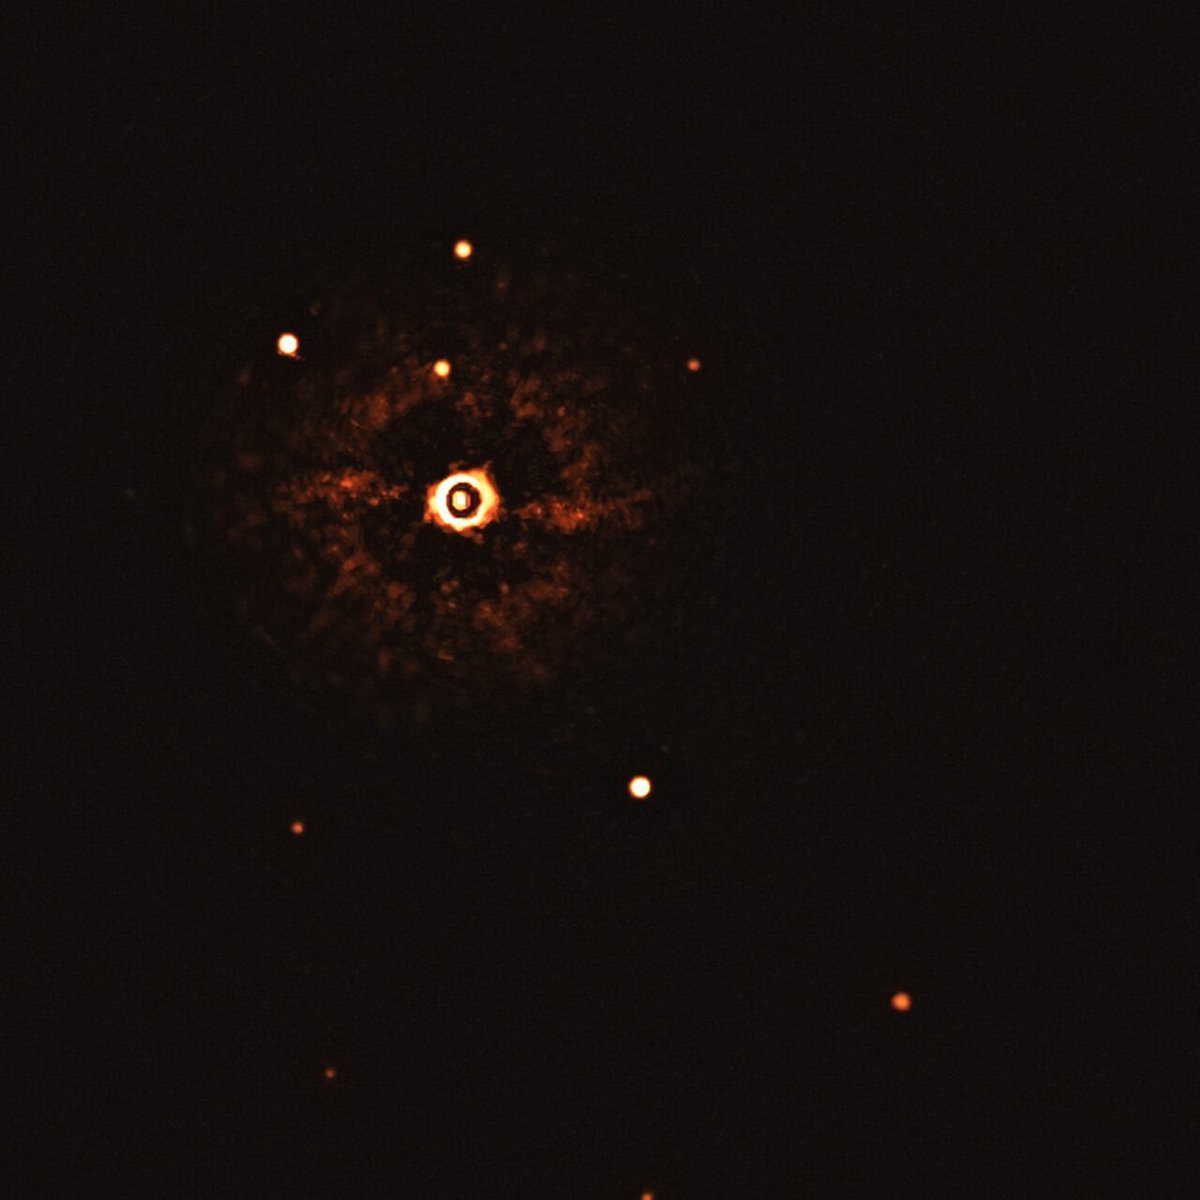 First ever image of another multi-planet solar system with the star like Sun captured by ESO Telescope.